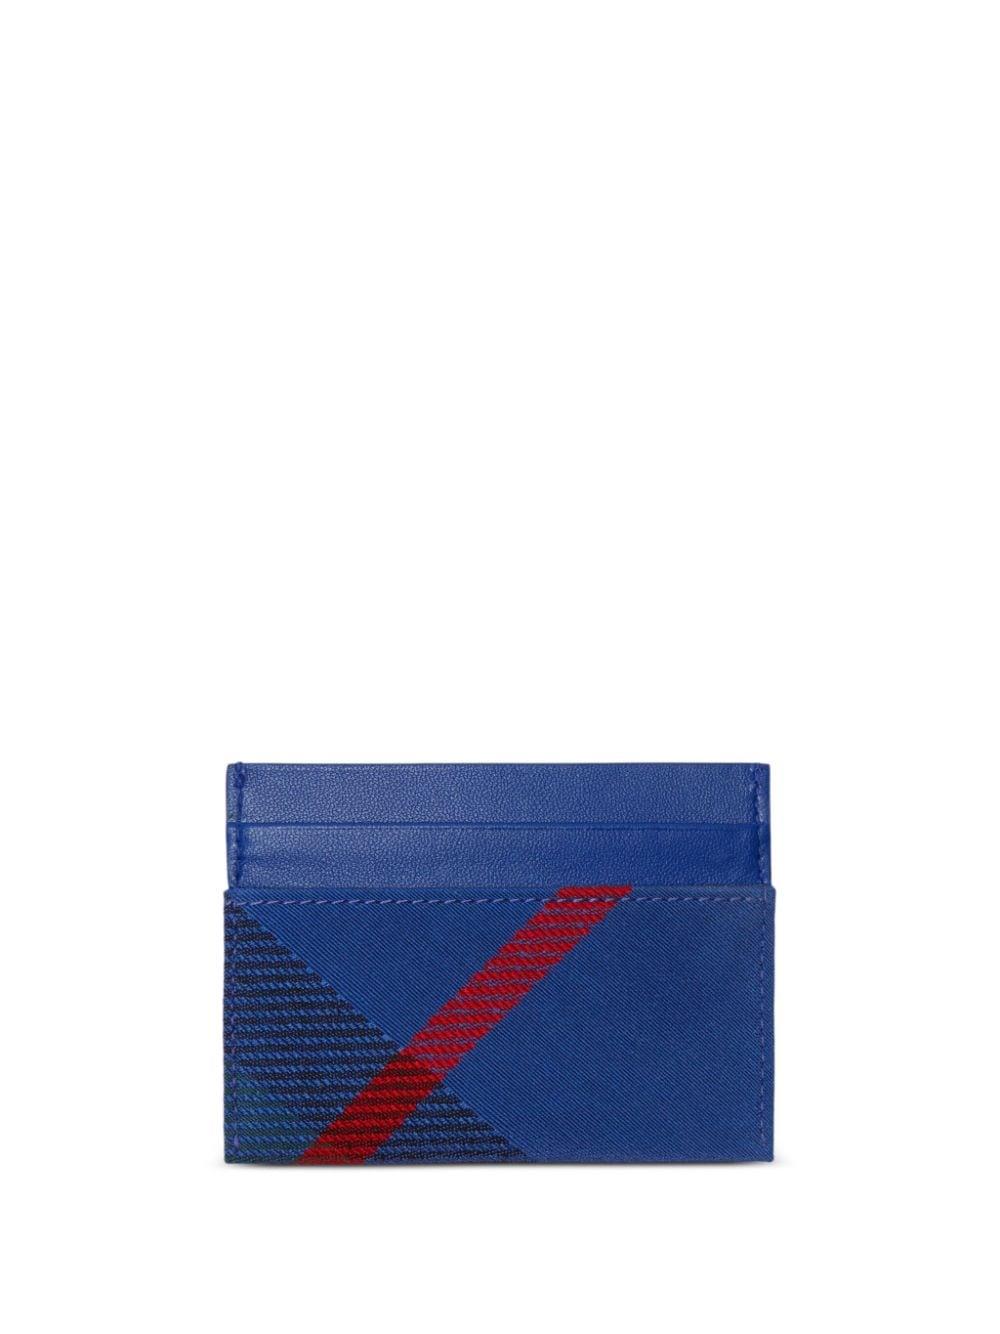 Burberry checked leather cardholder - Blue